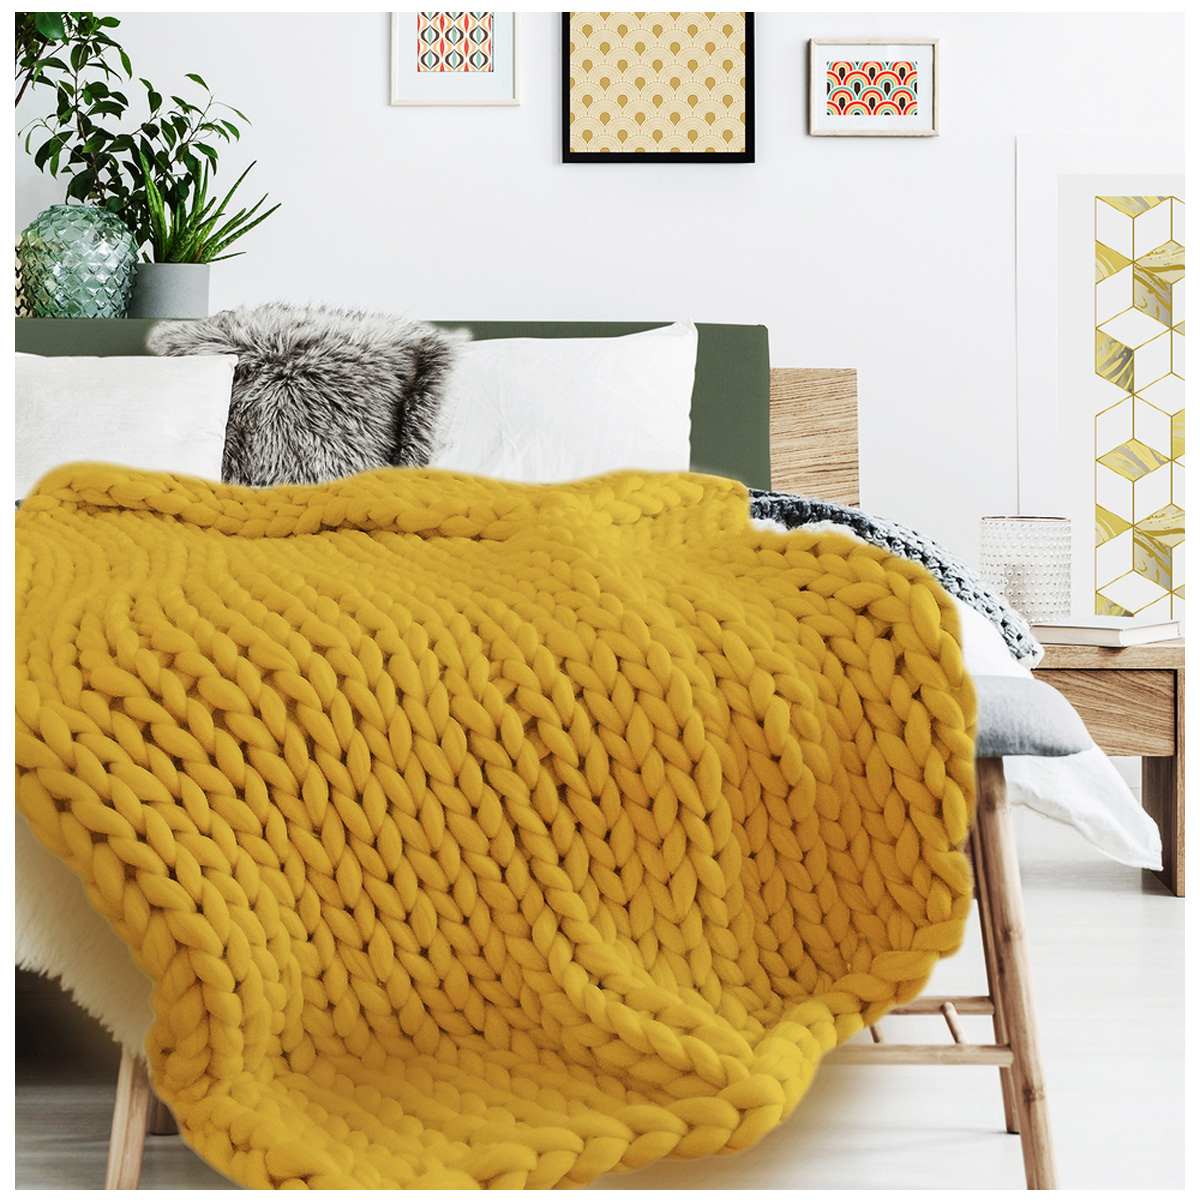 Plaid acrylique \'Chunky Knit\' ocre moutarde (tricot) - 150x120 cm - [R1075]